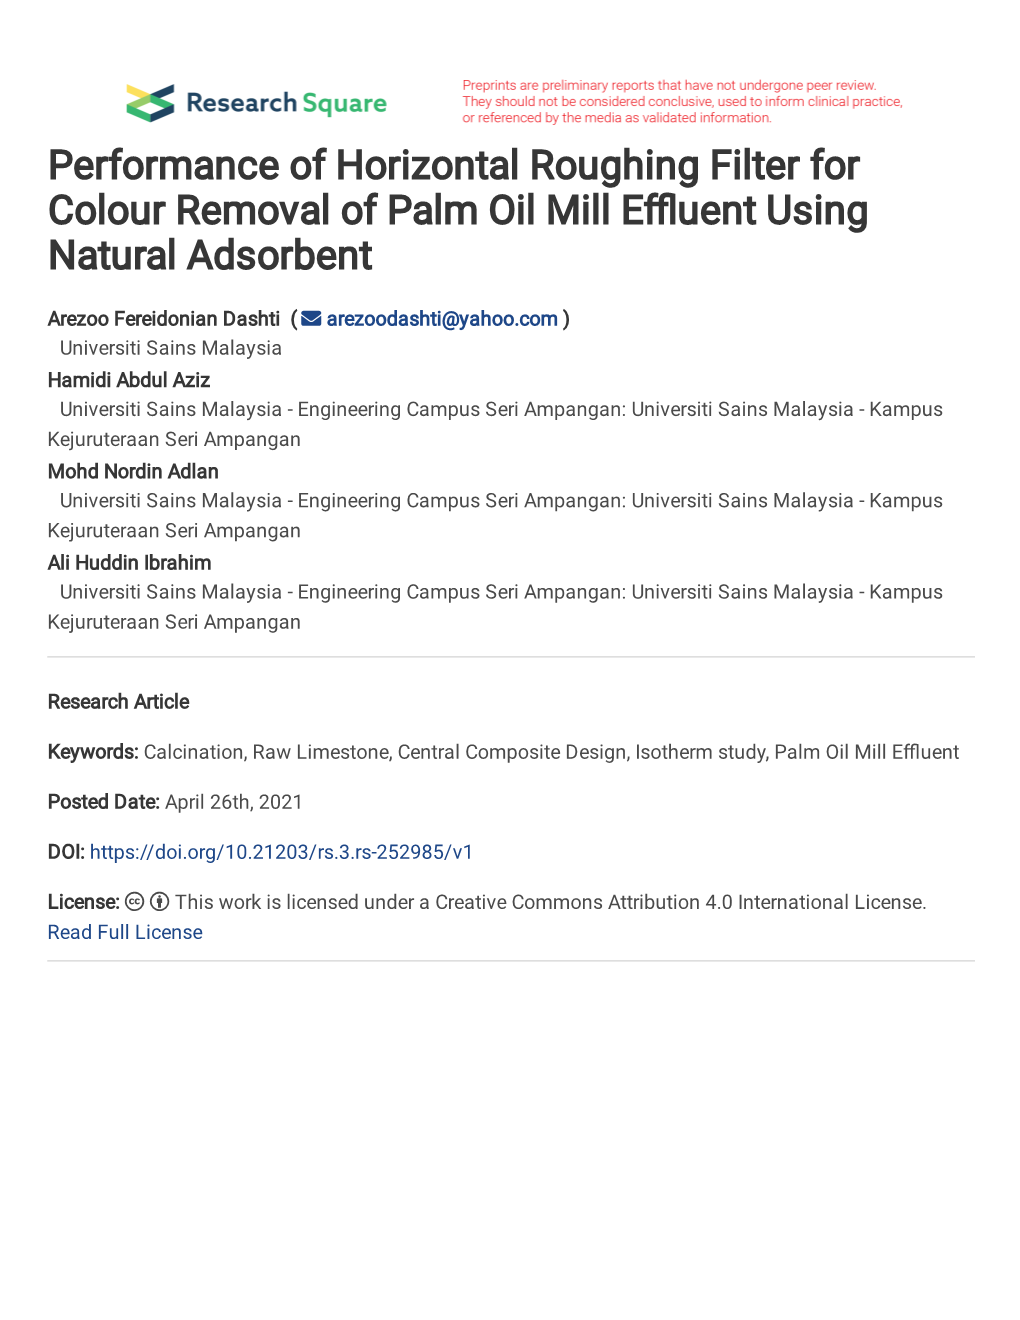 Performance of Horizontal Roughing Filter for Colour Removal of Palm Oil Mill Effluent Using Natural Adsorbent Arezoo Fereidonia